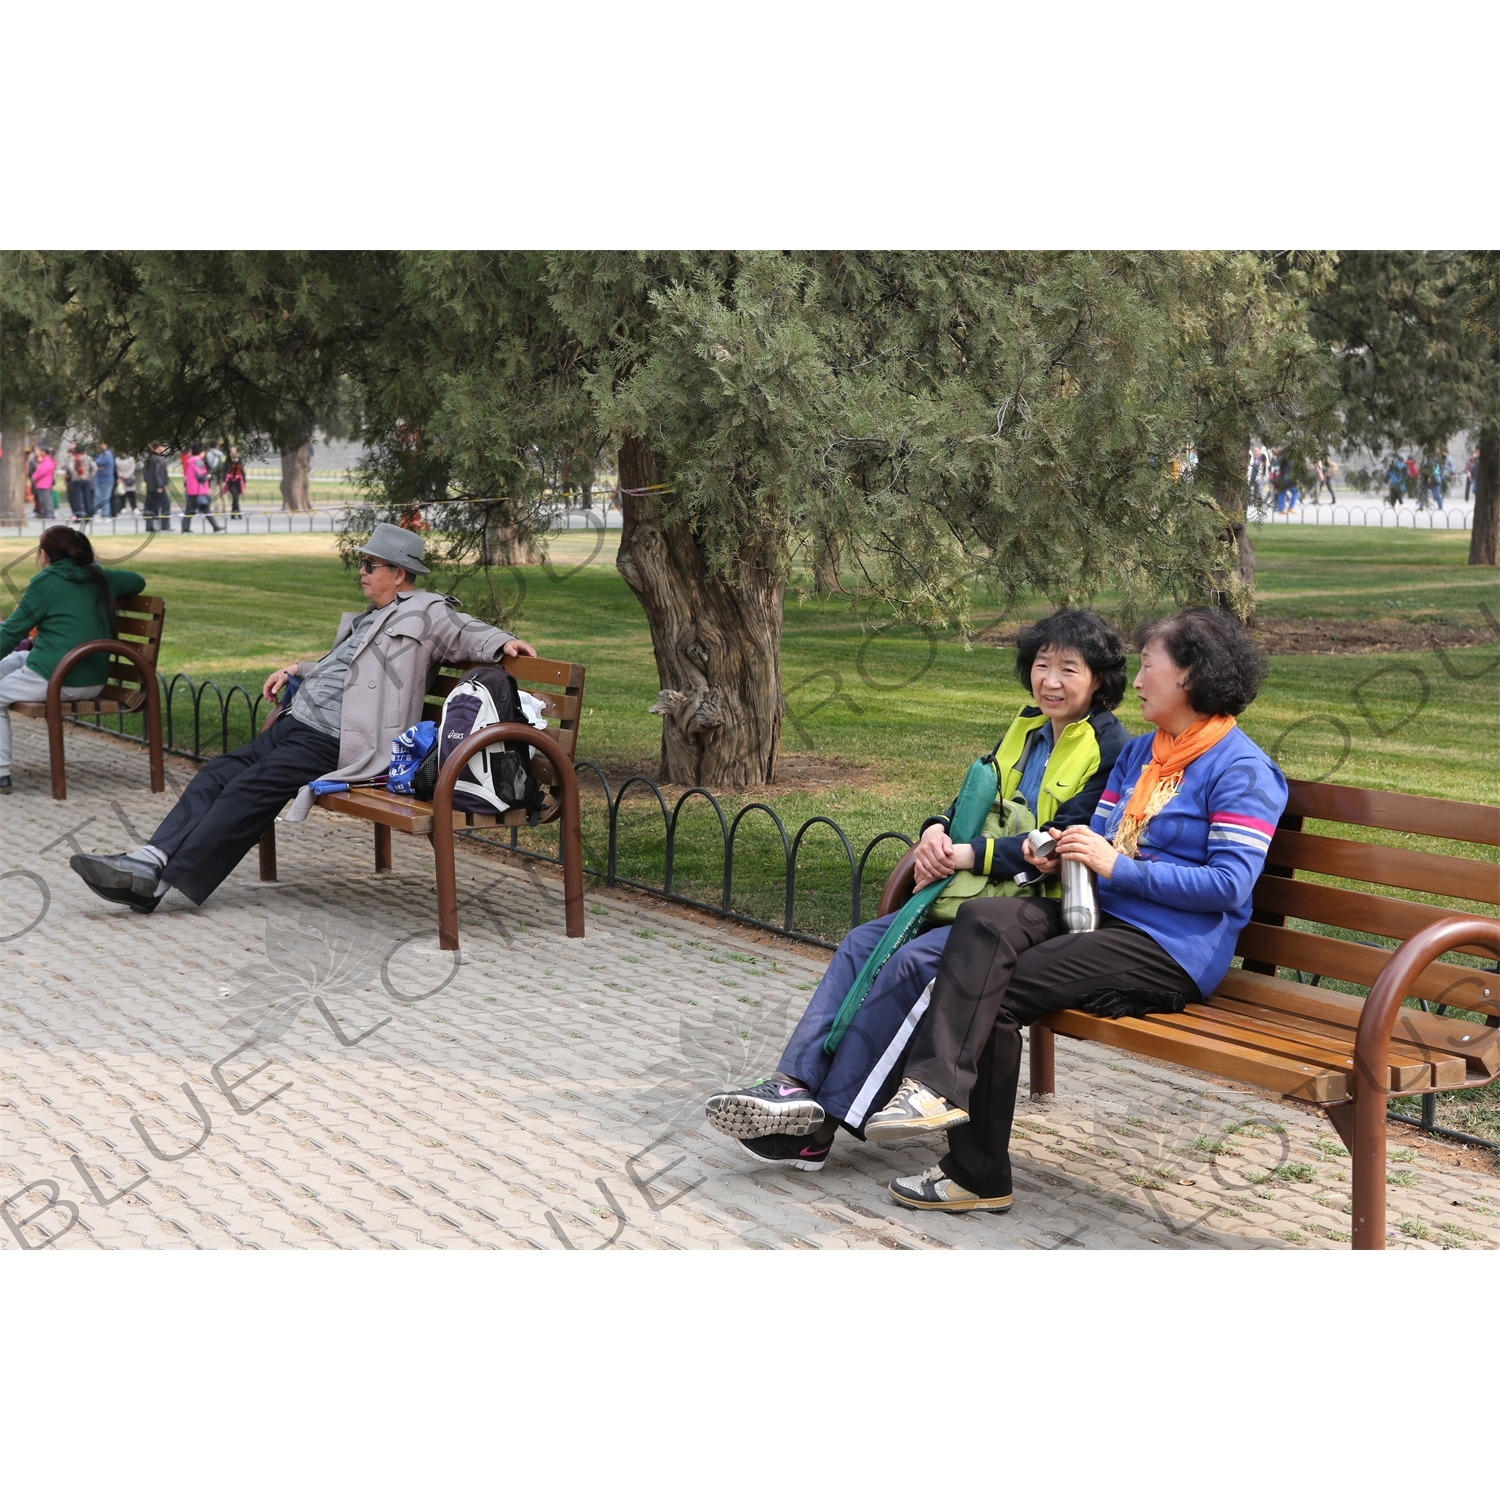 People Sitting on Benches in the Temple of Heaven (Tiantan) in Beijing